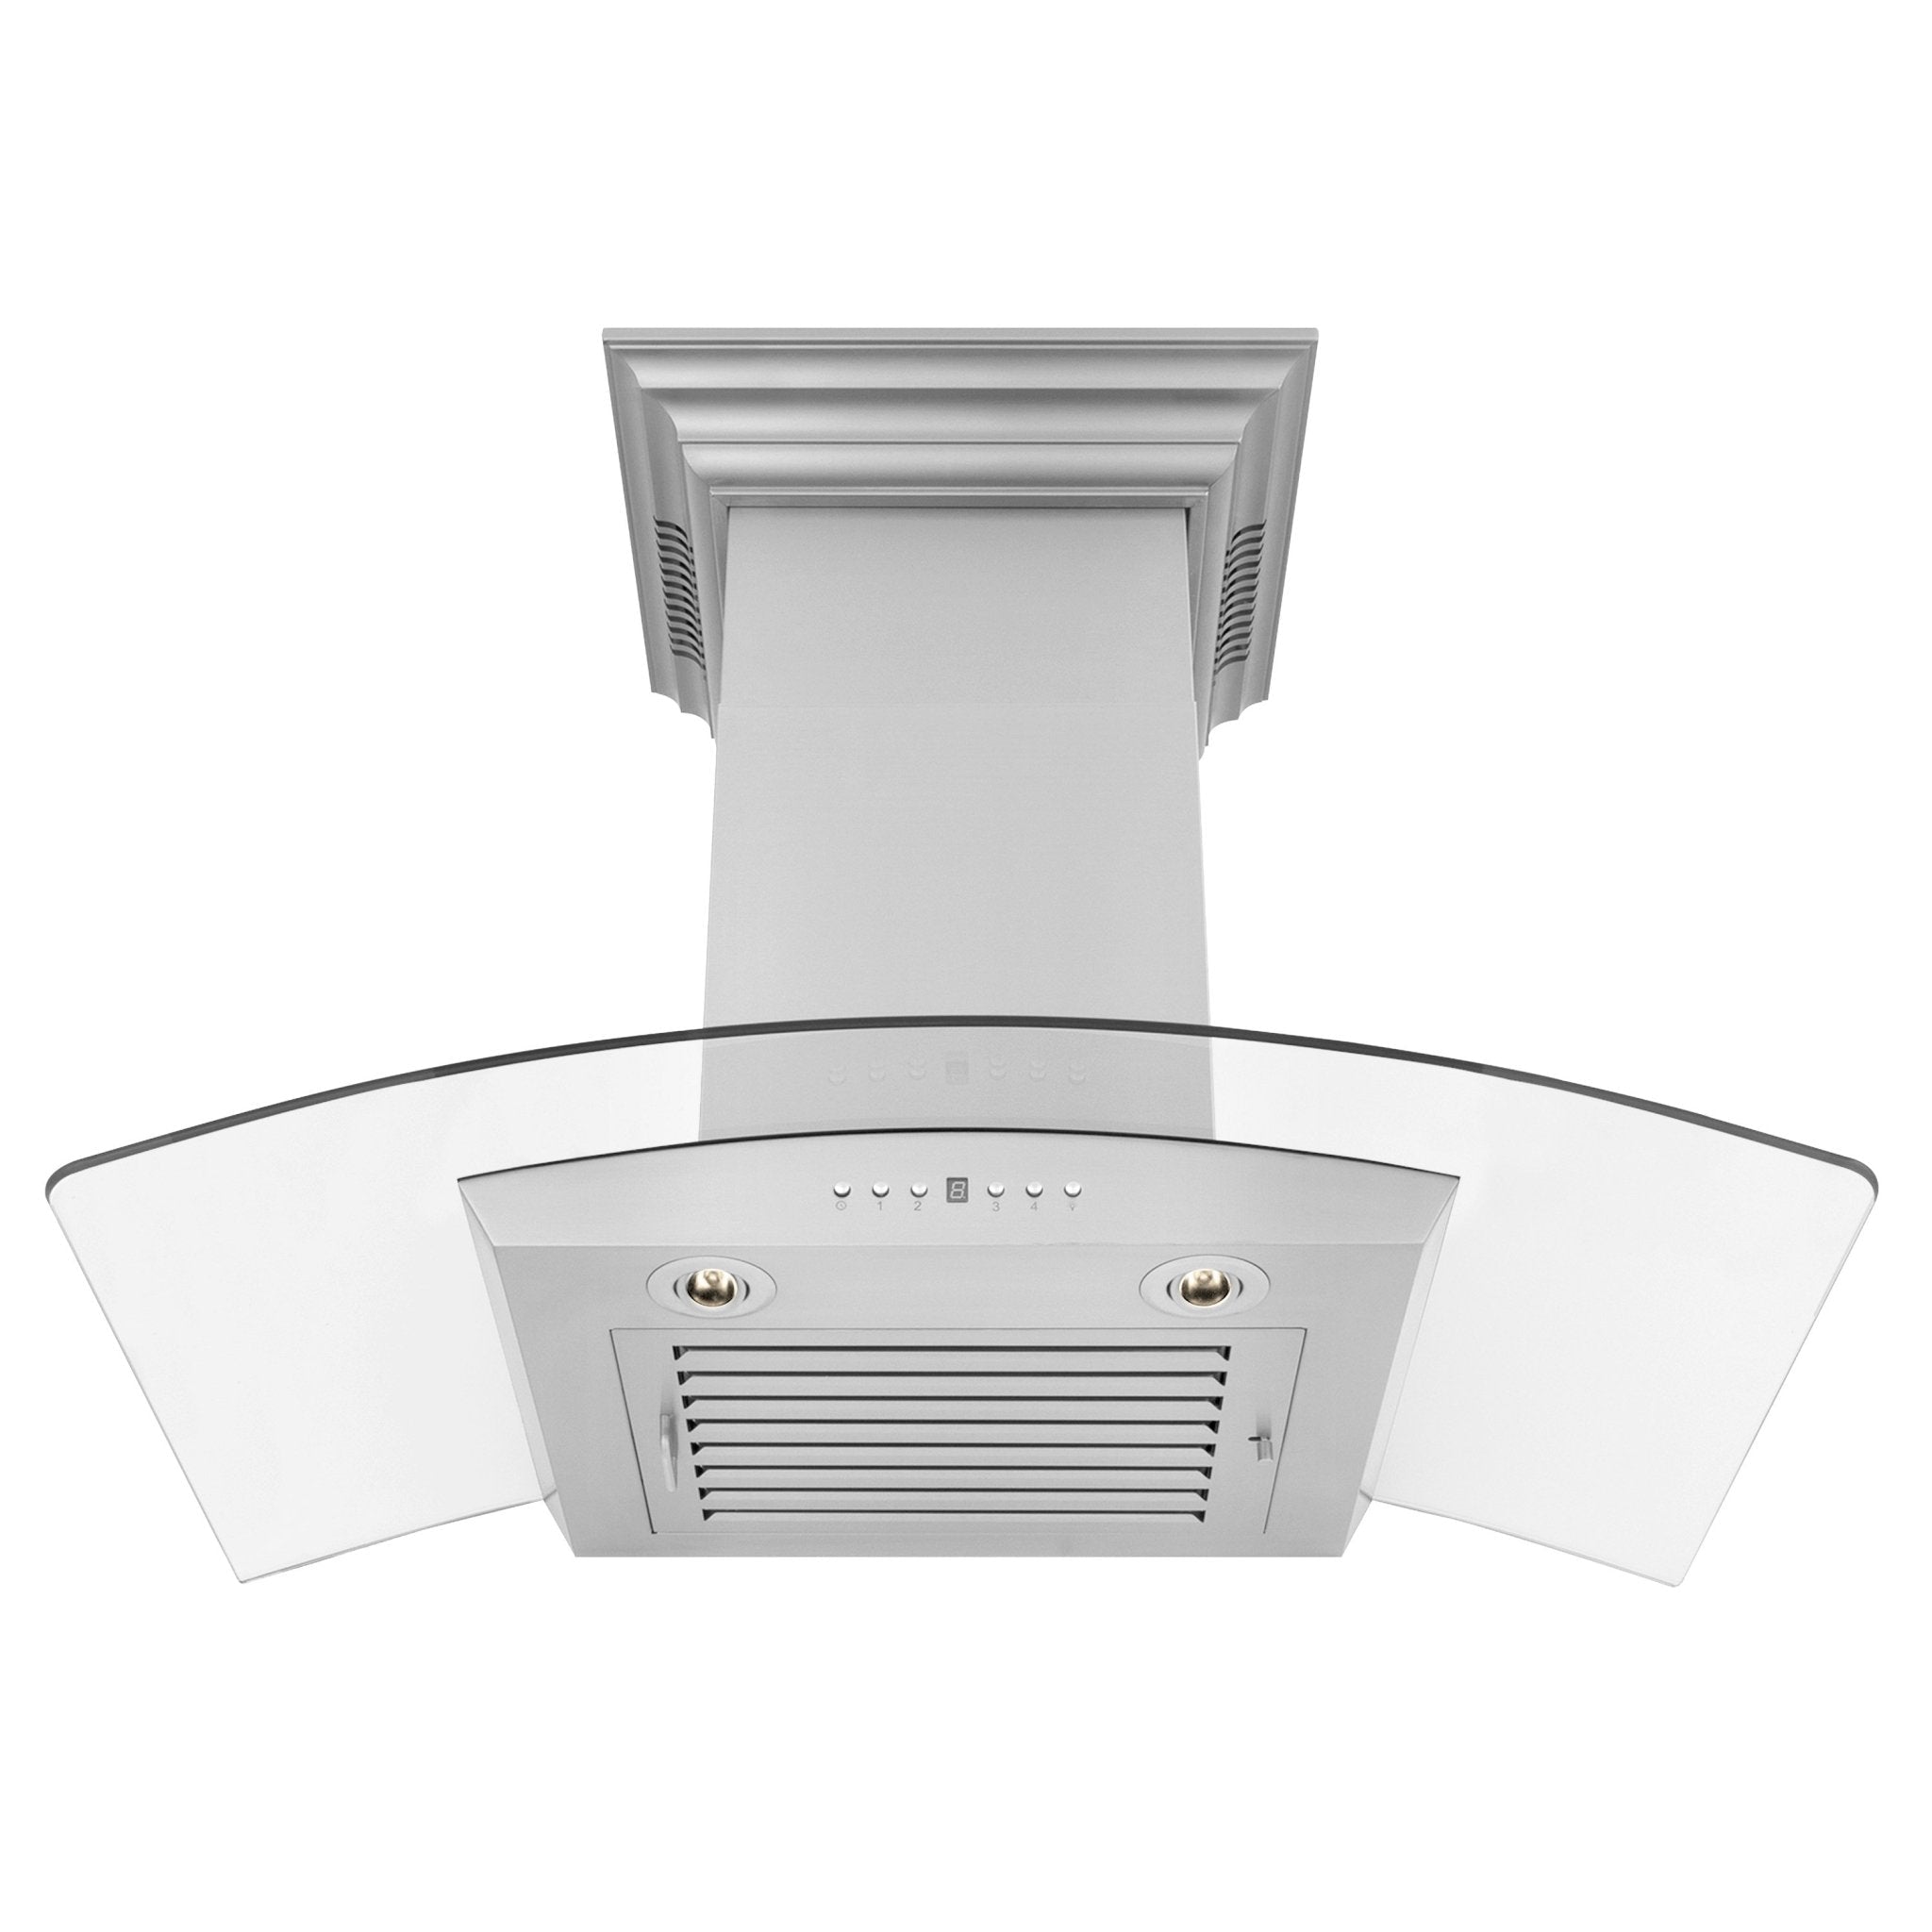 ZLINE Wall Mount Range Hood in Stainless Steel and Glass with Built-in CrownSound Bluetooth Speakers (KZCRN-BT) 